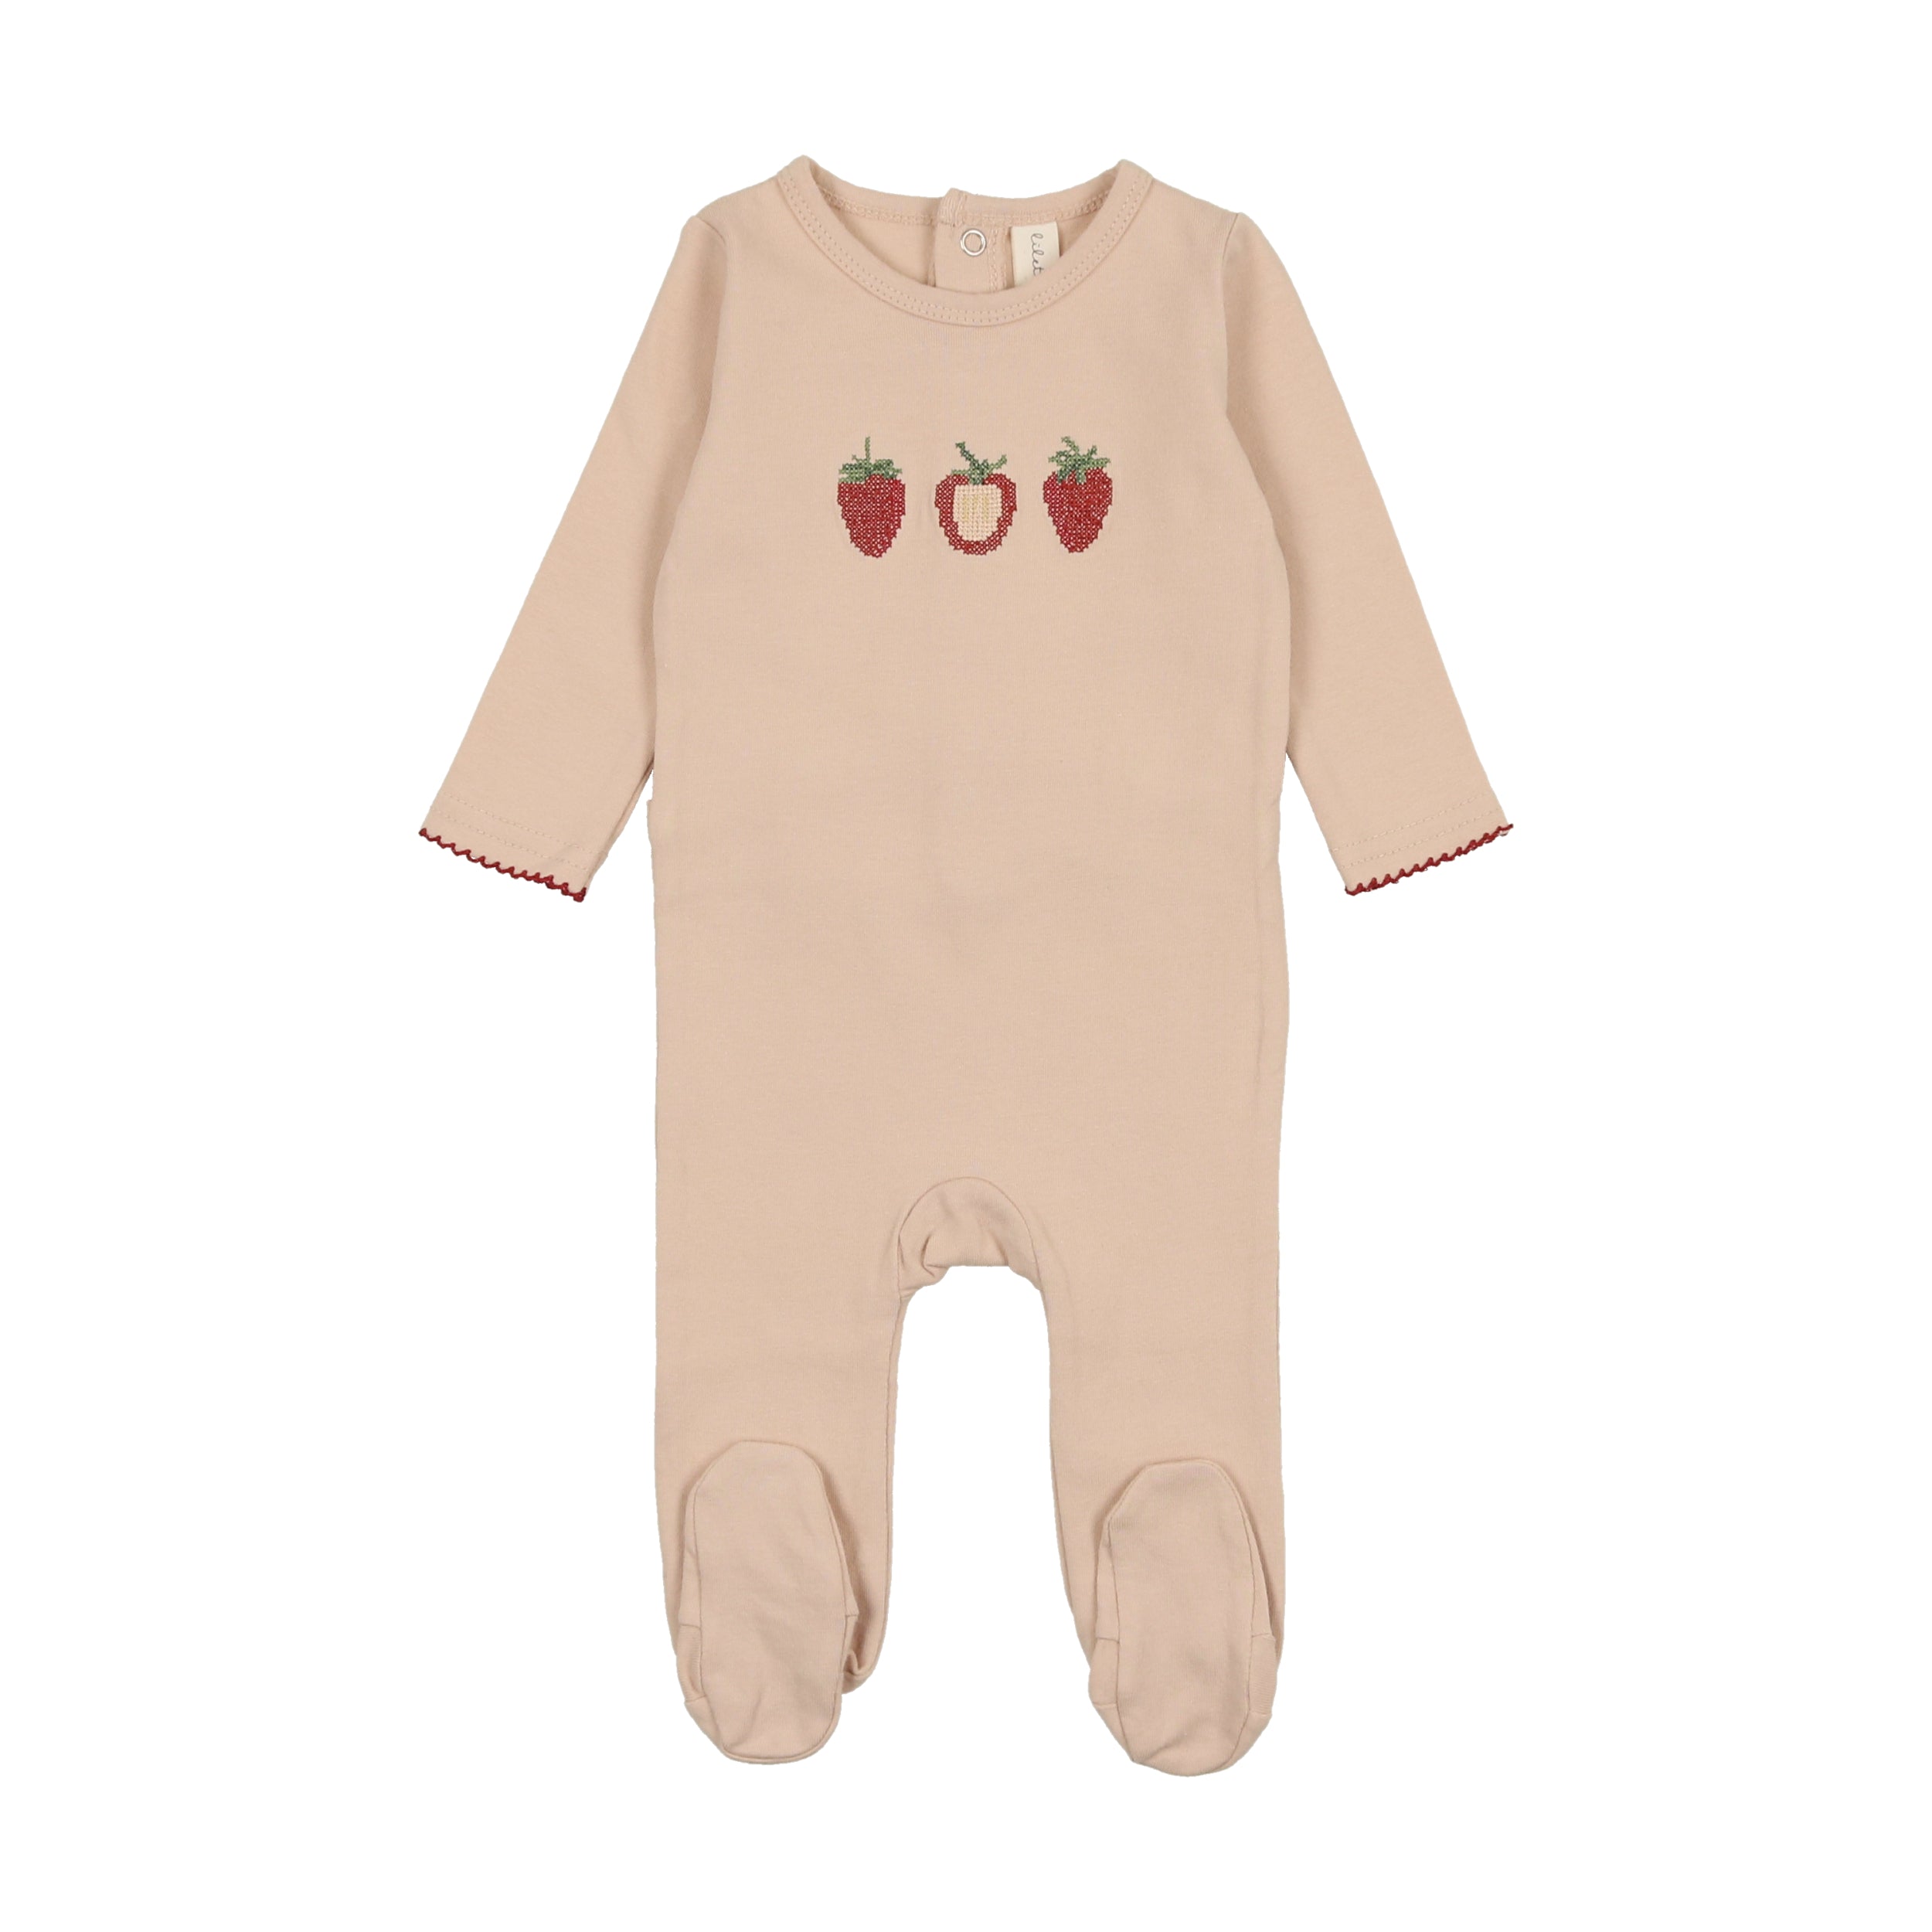 Peach/Strawberry Embroidered Fruit Footie